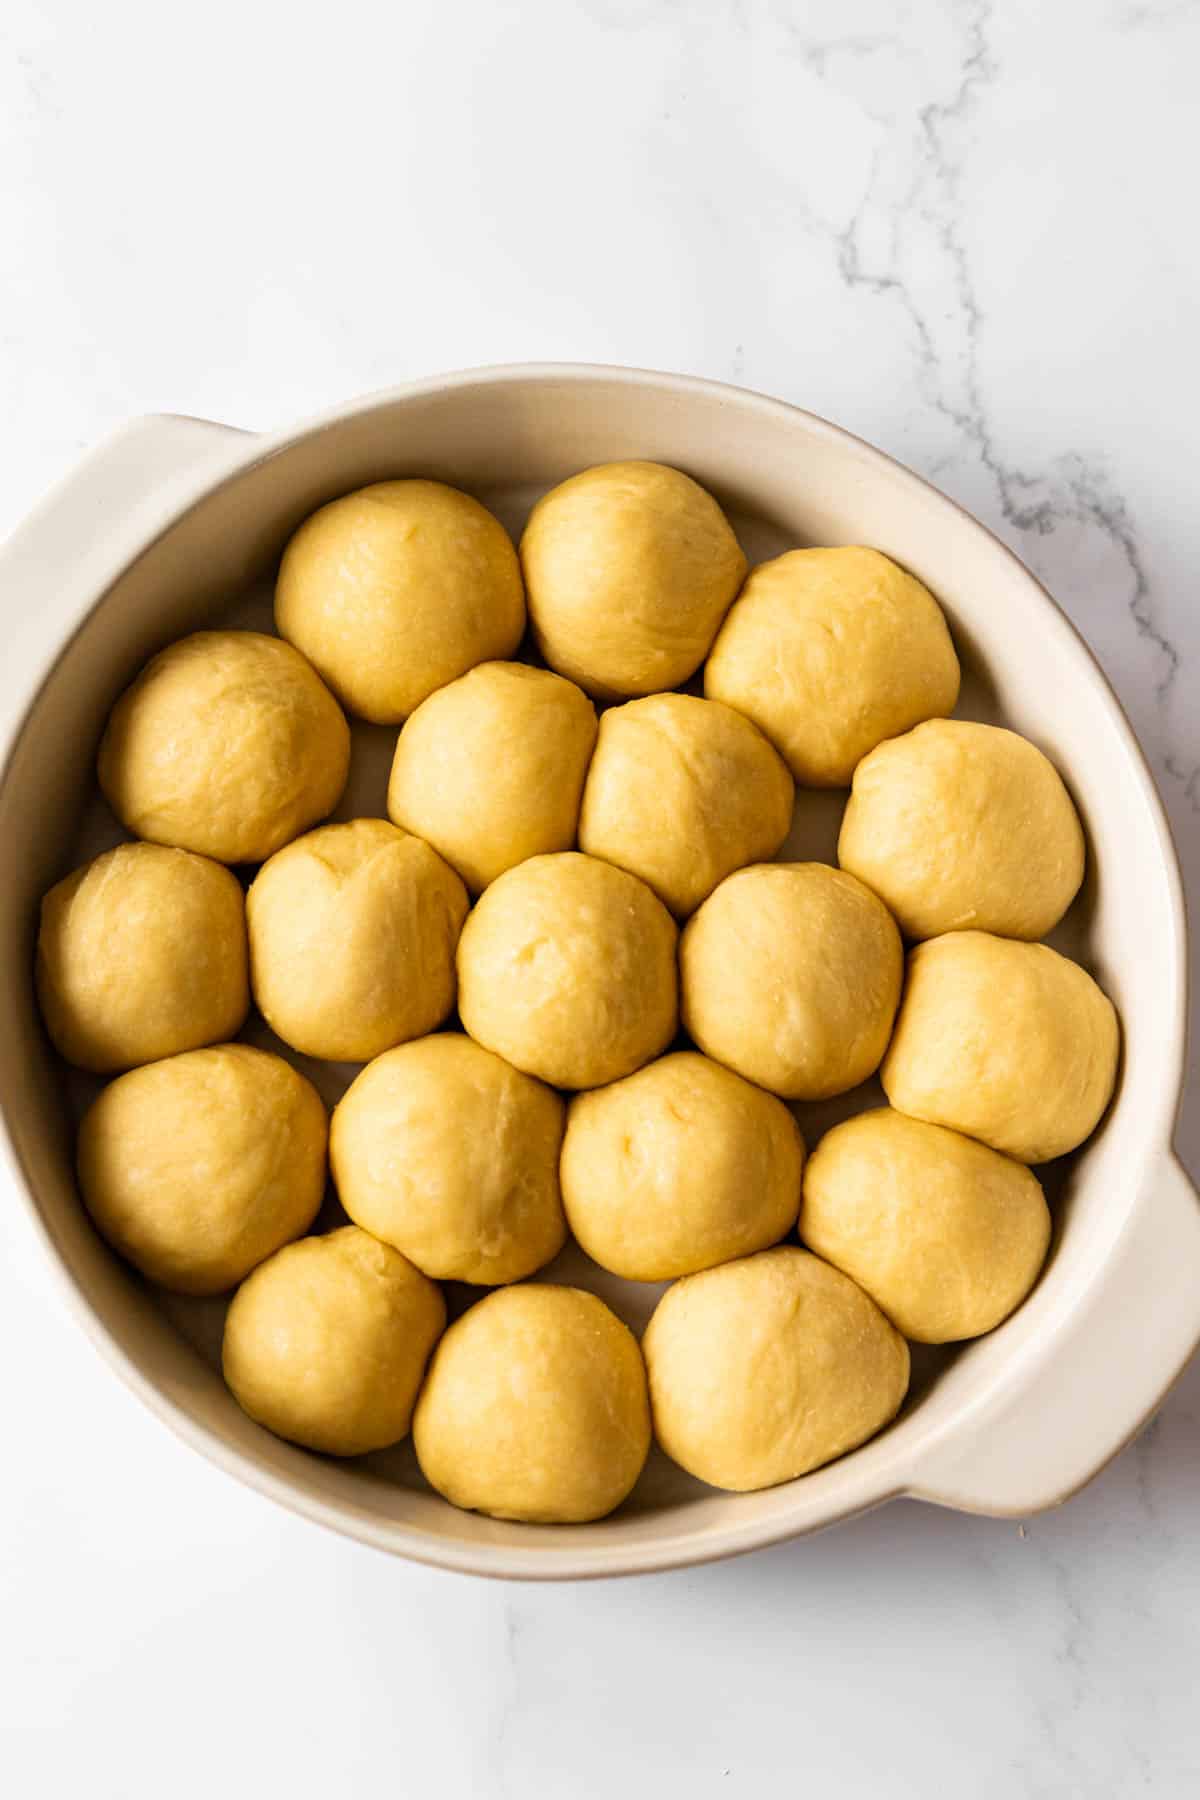 unbaked Portuguese sweet rolls in baking dish